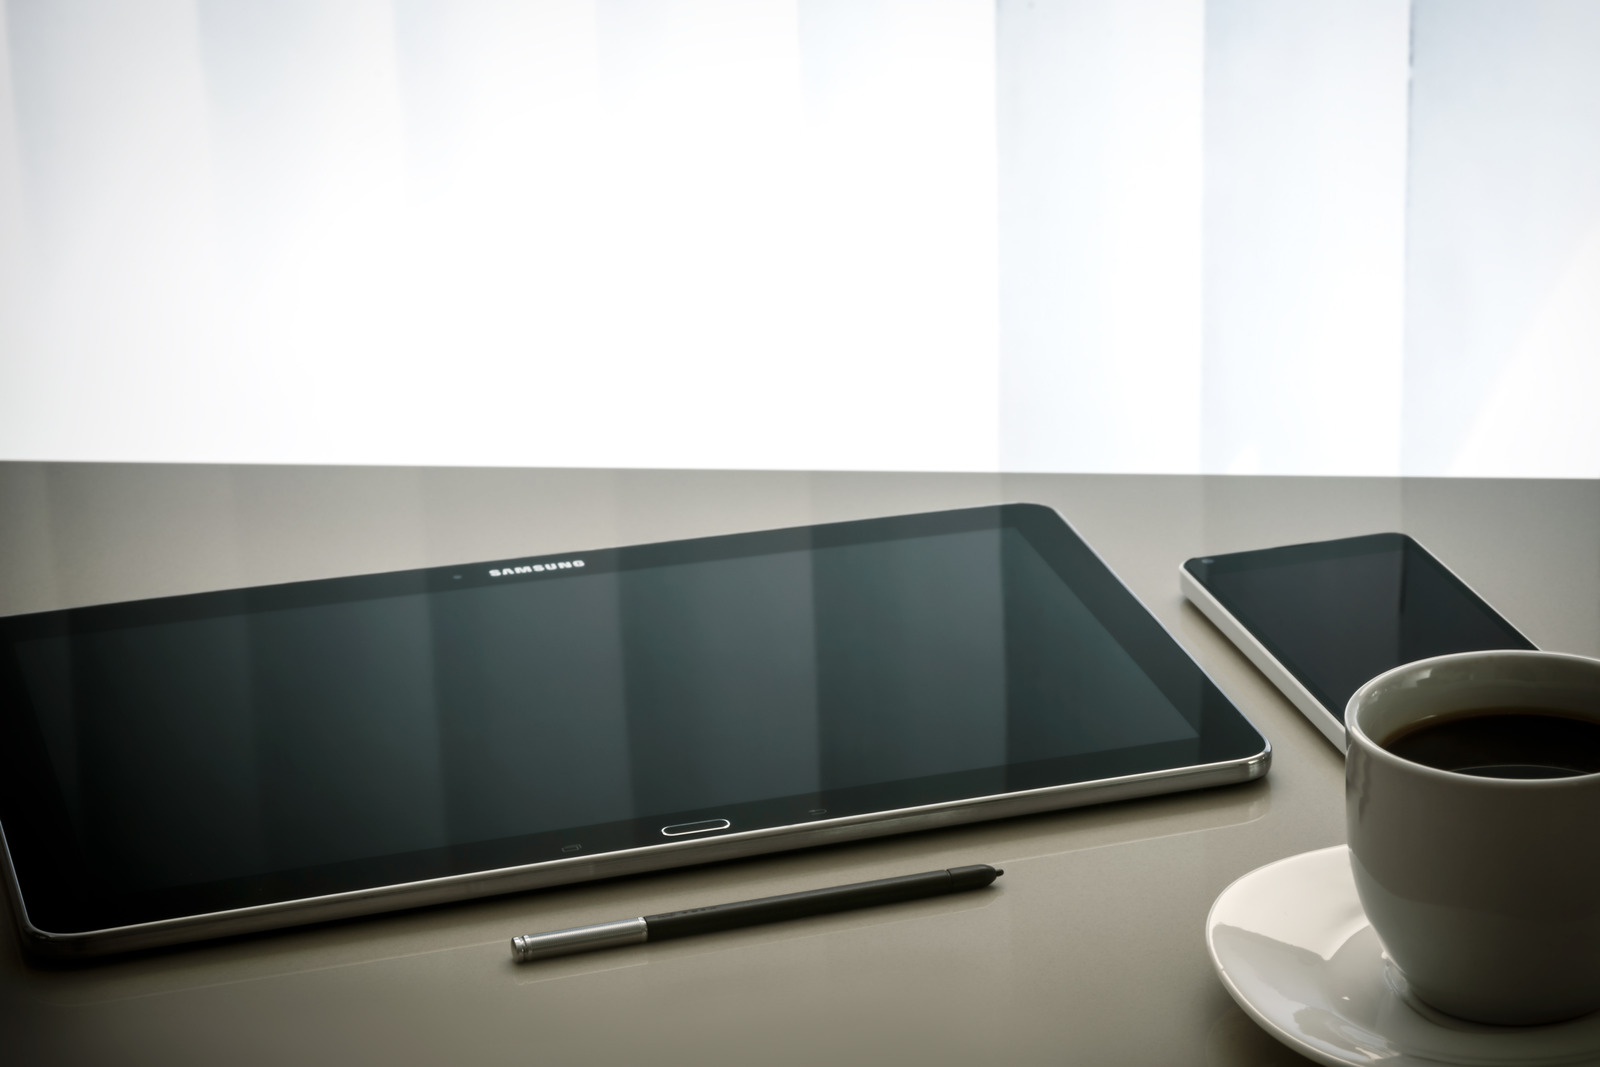 Canva – Black Samsung Android Tablet Computer Beside Stylus Pen